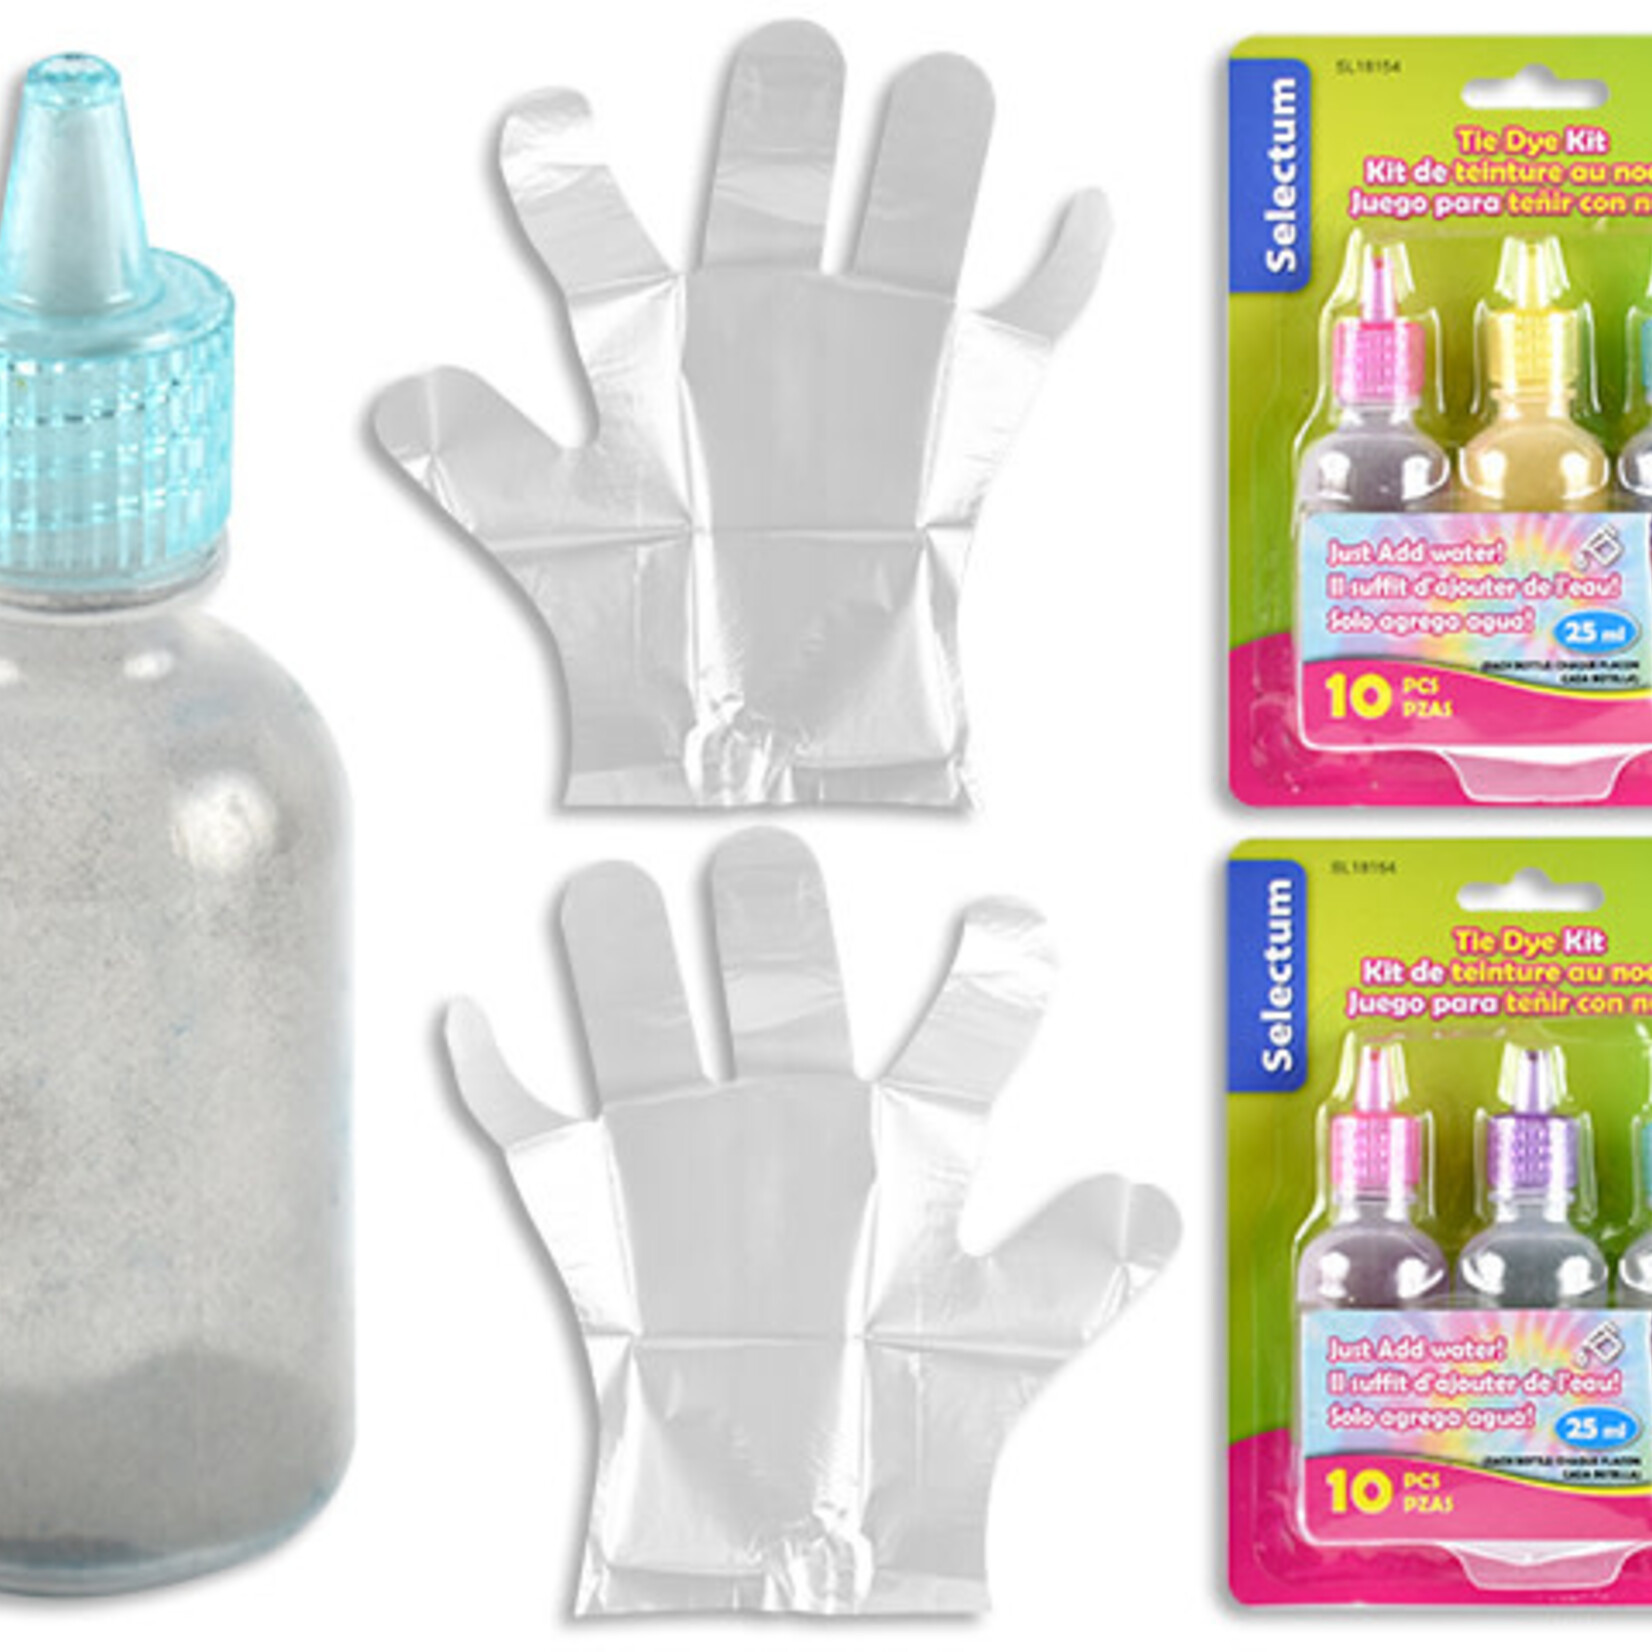 Tie Dye Kit with Gloves (25ml each) - Purple, Turquoise and  Fuchsia